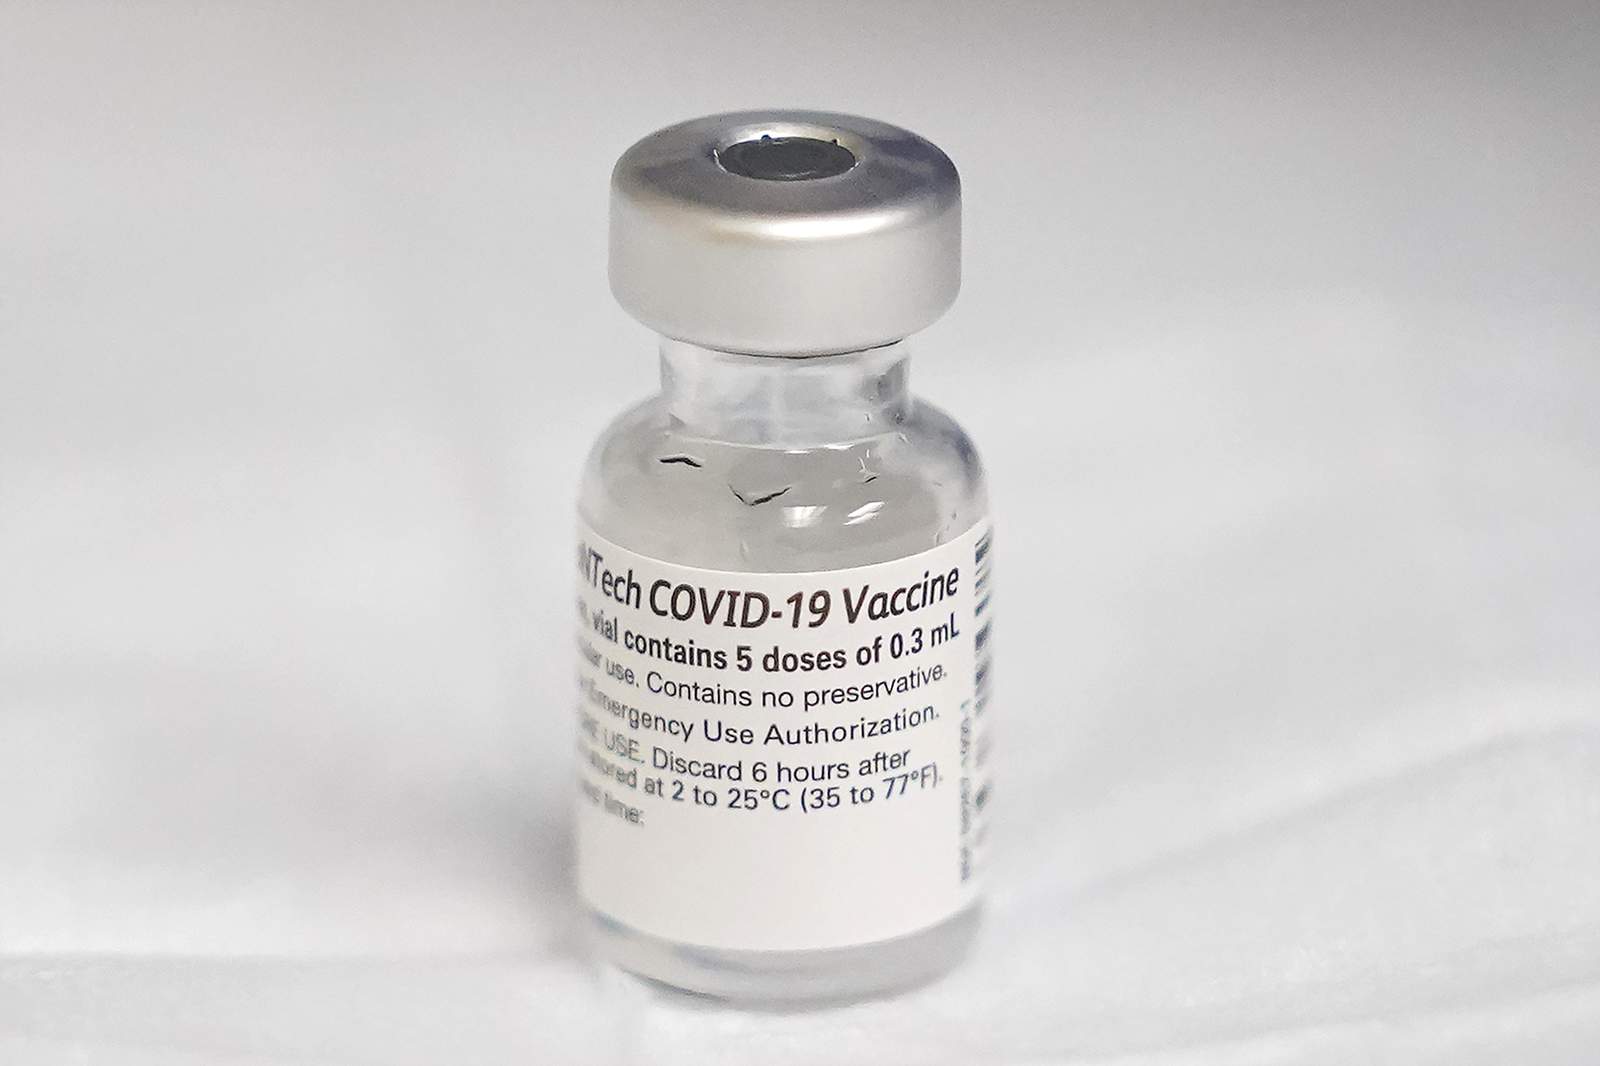 Hospital workers receive second dose of COVID-19 vaccine as officials work to ramp up public vaccinations